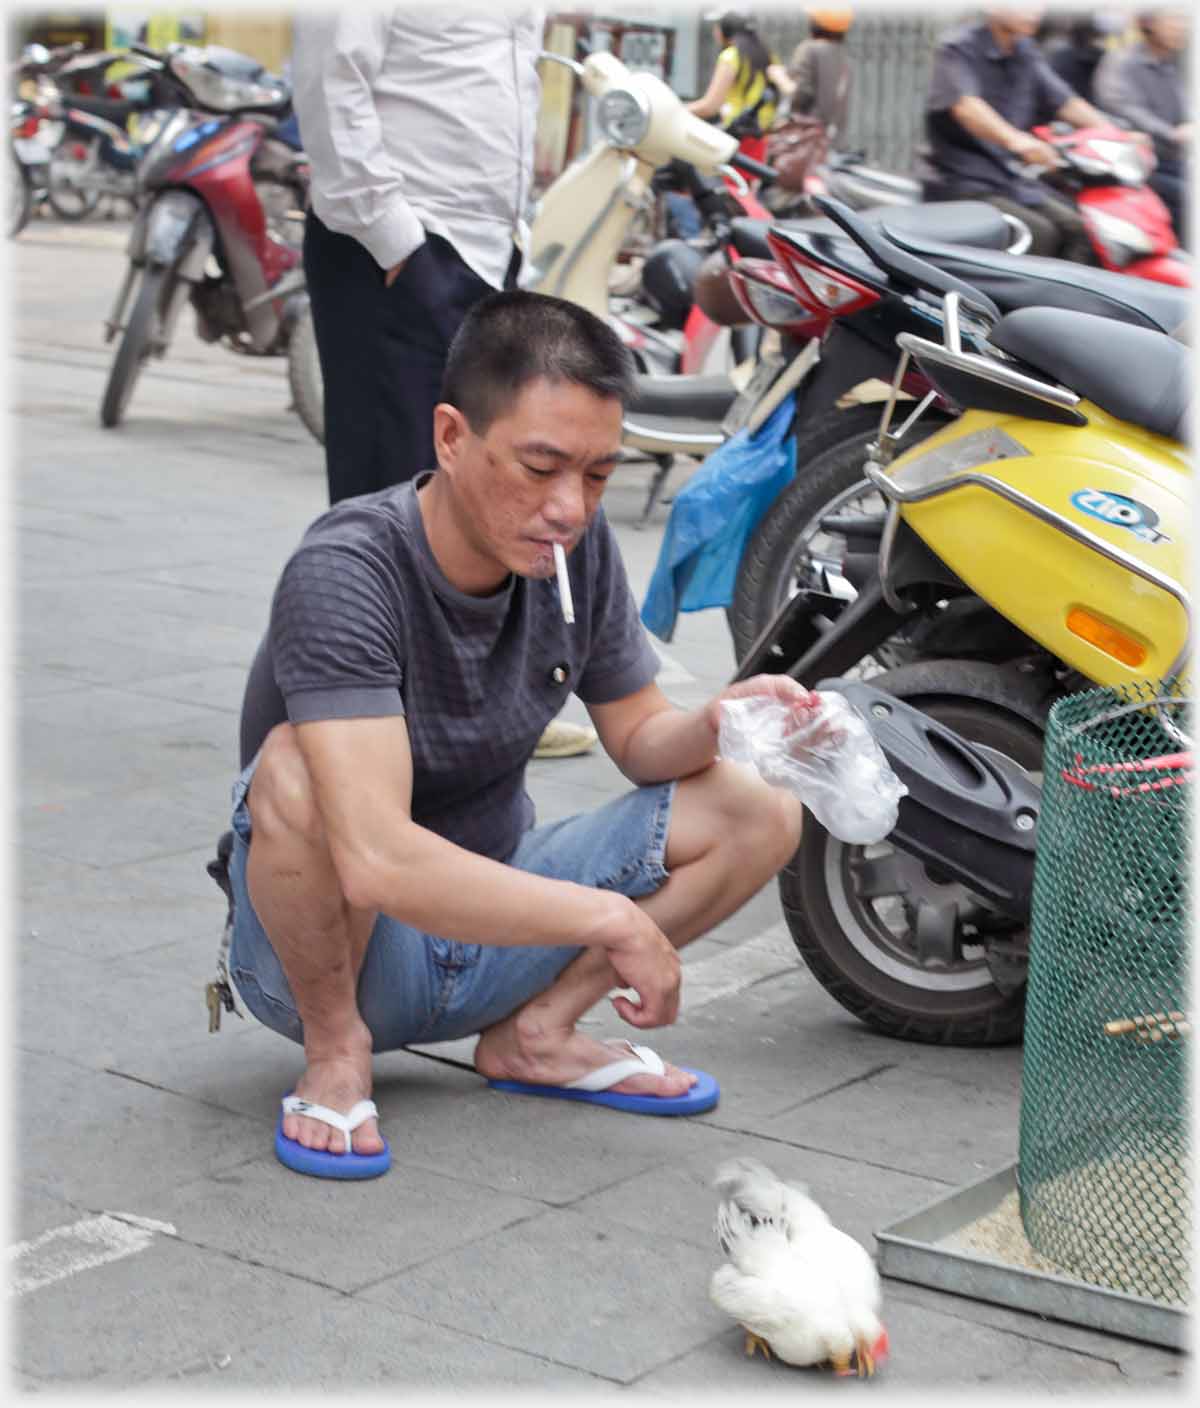 Man, cigarette in mouth, hunkered down feeding hen on pavement.